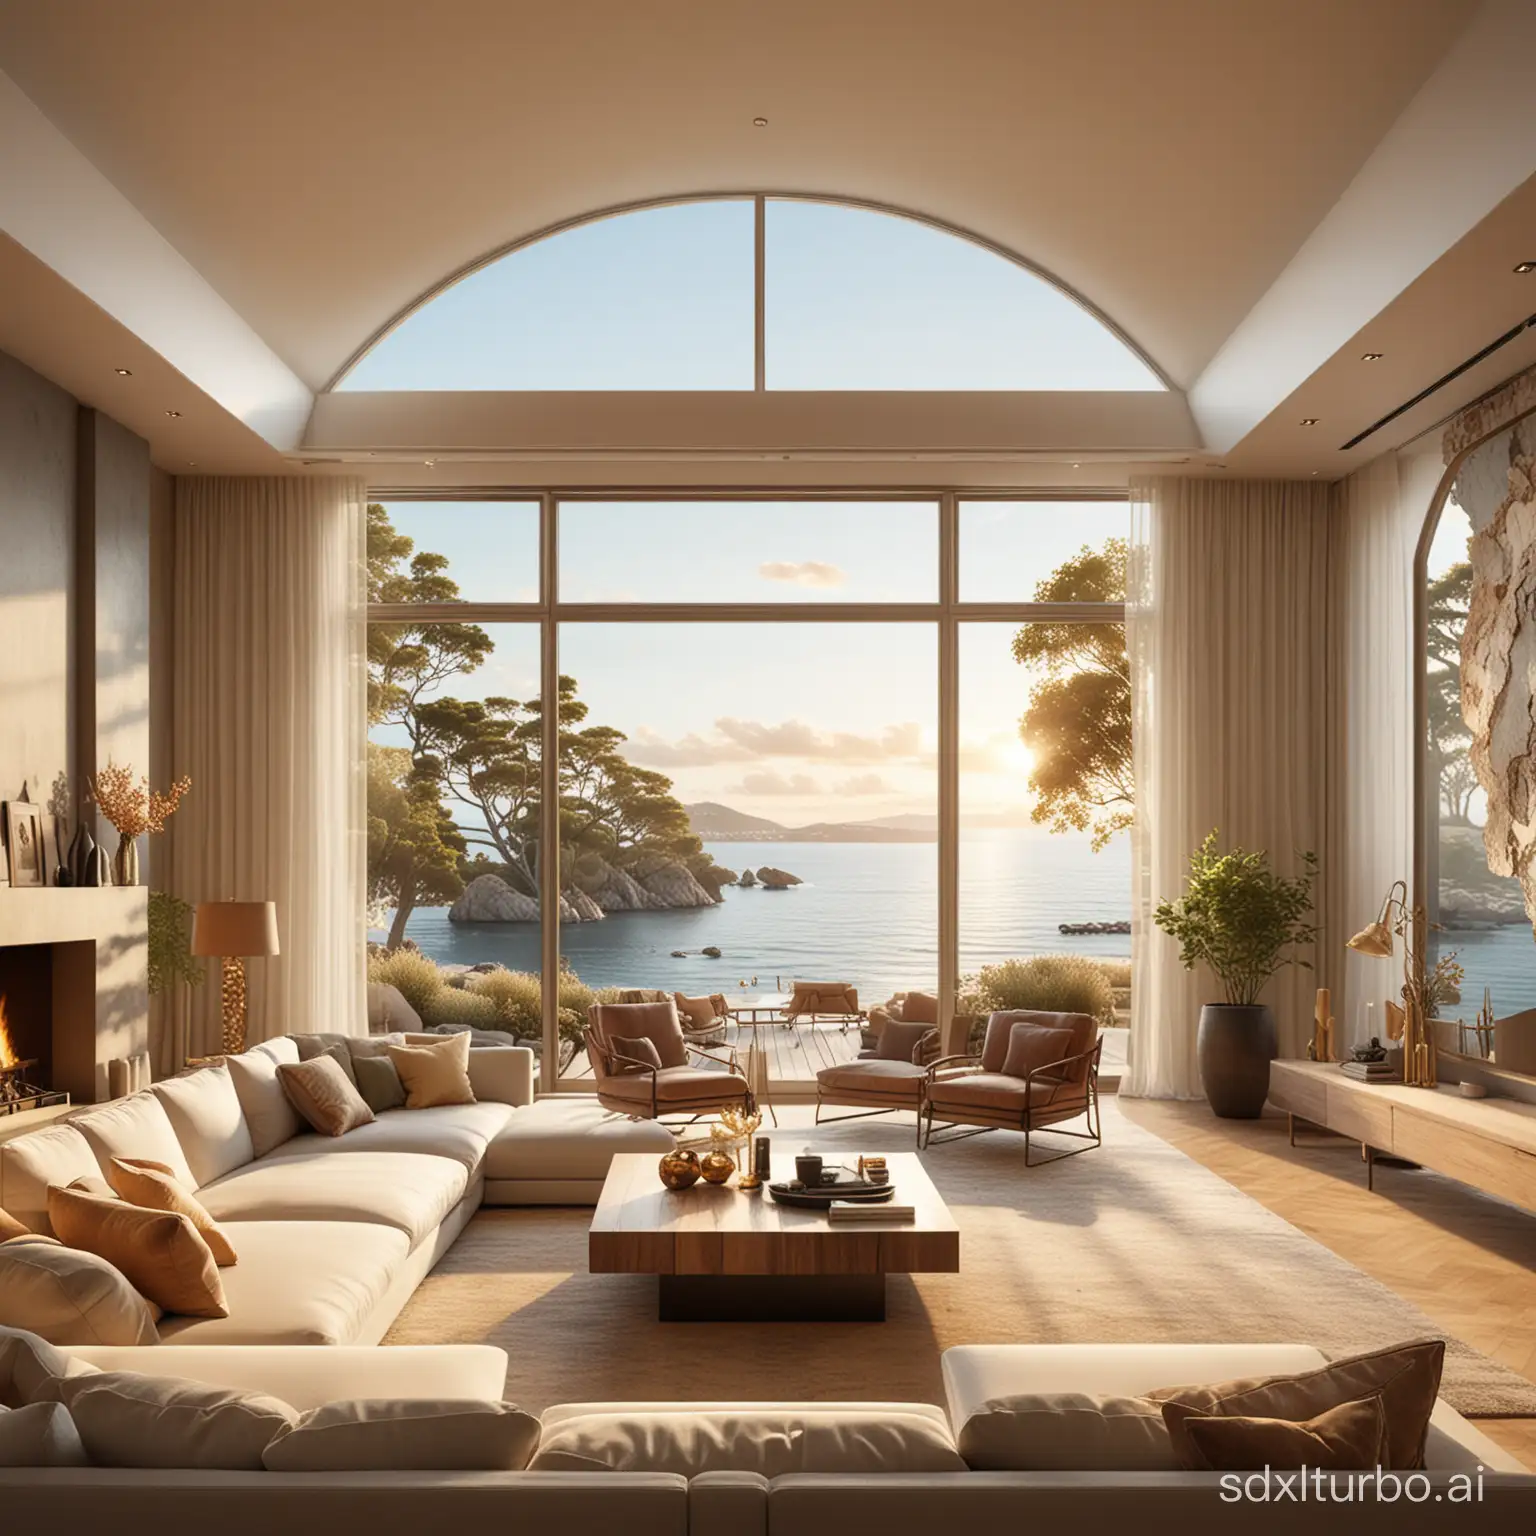 A stunning 3D rendering of an opulent living room, where the line between reality and art seamlessly blends. A large window showcases a tranquil bay, merging with the actual space as if the luxurious town outside spills into the real room. The interior is adorned with plush seating, warm lighting, and a cozy fireplace, creating a welcoming and enchanting atmosphere. Sunlight pours in from the bay, casting a warm, golden glow over the captivating scene. This imaginative and whimsical space provides an enthralling experience, blurring the boundary between the two worlds.